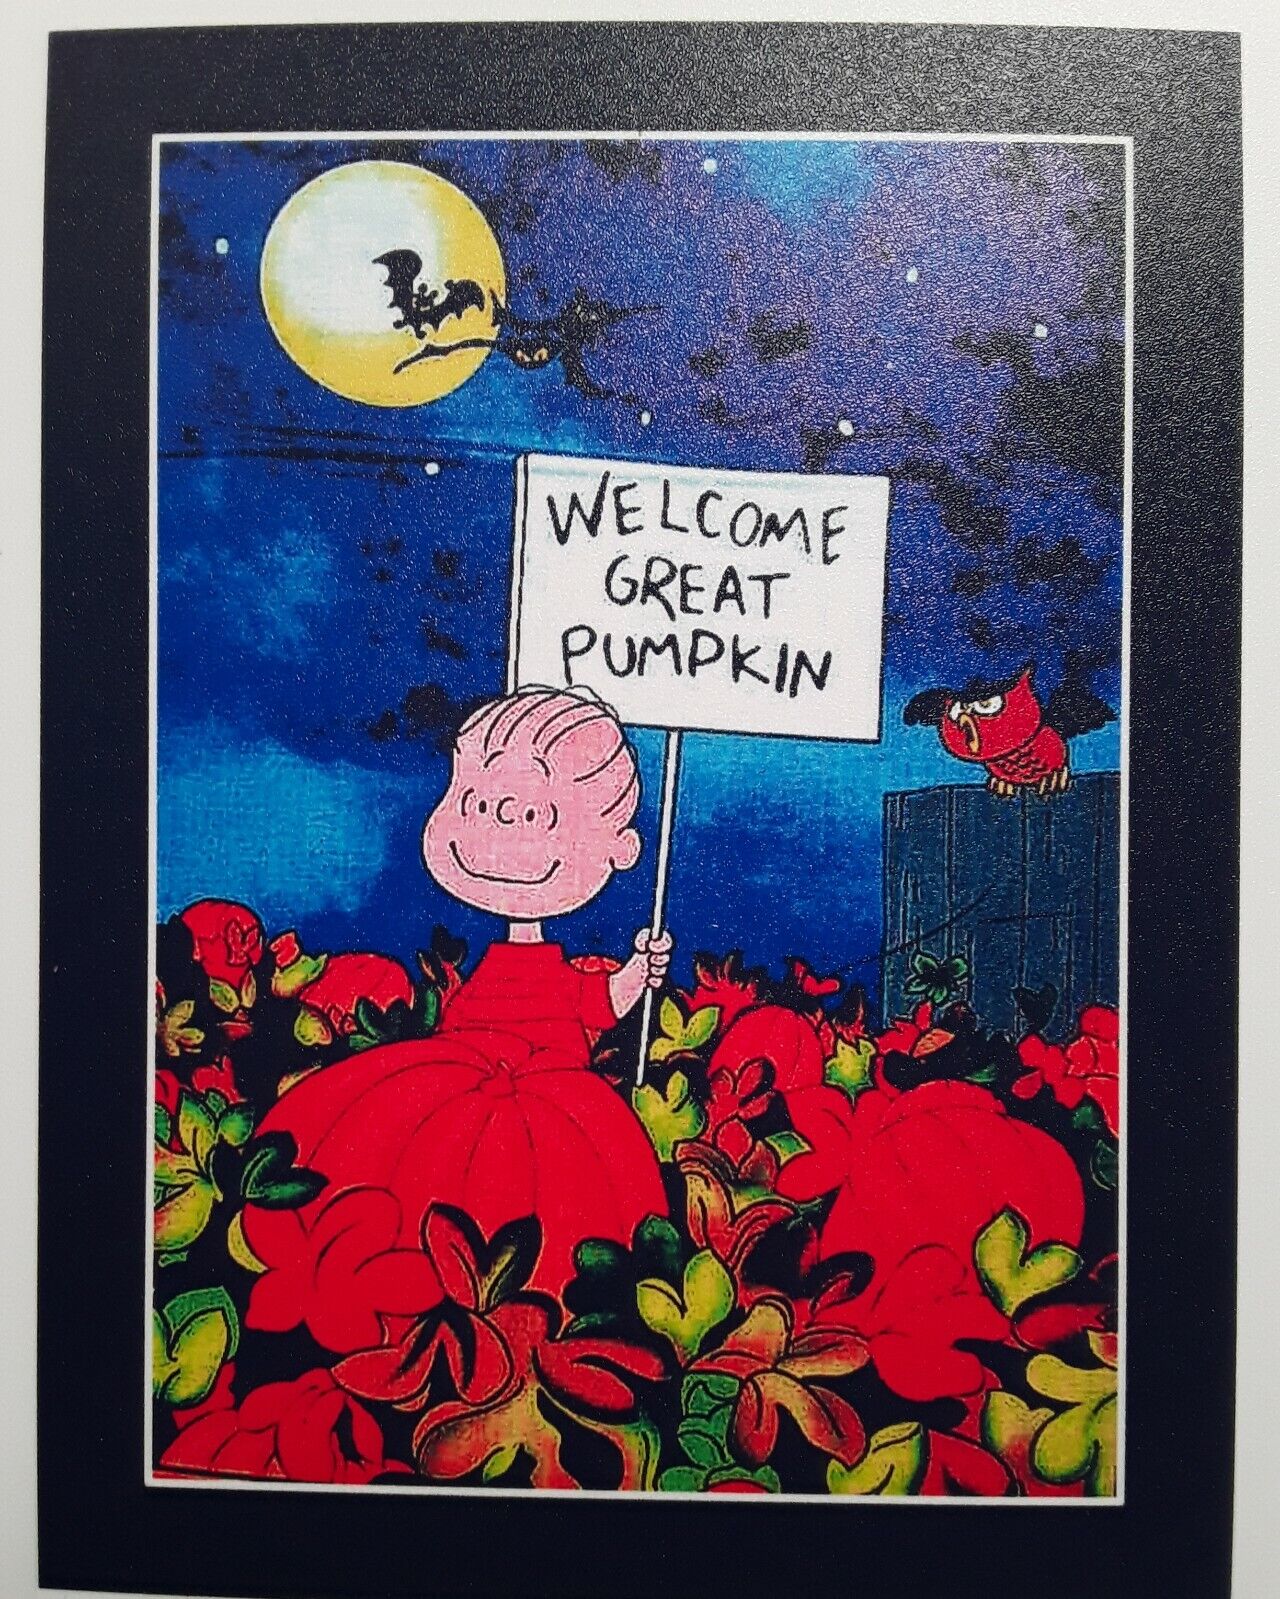 Peanuts Halloween Magnet ☆Welcome Great Pumpkin 3.5X4.5 inches large 